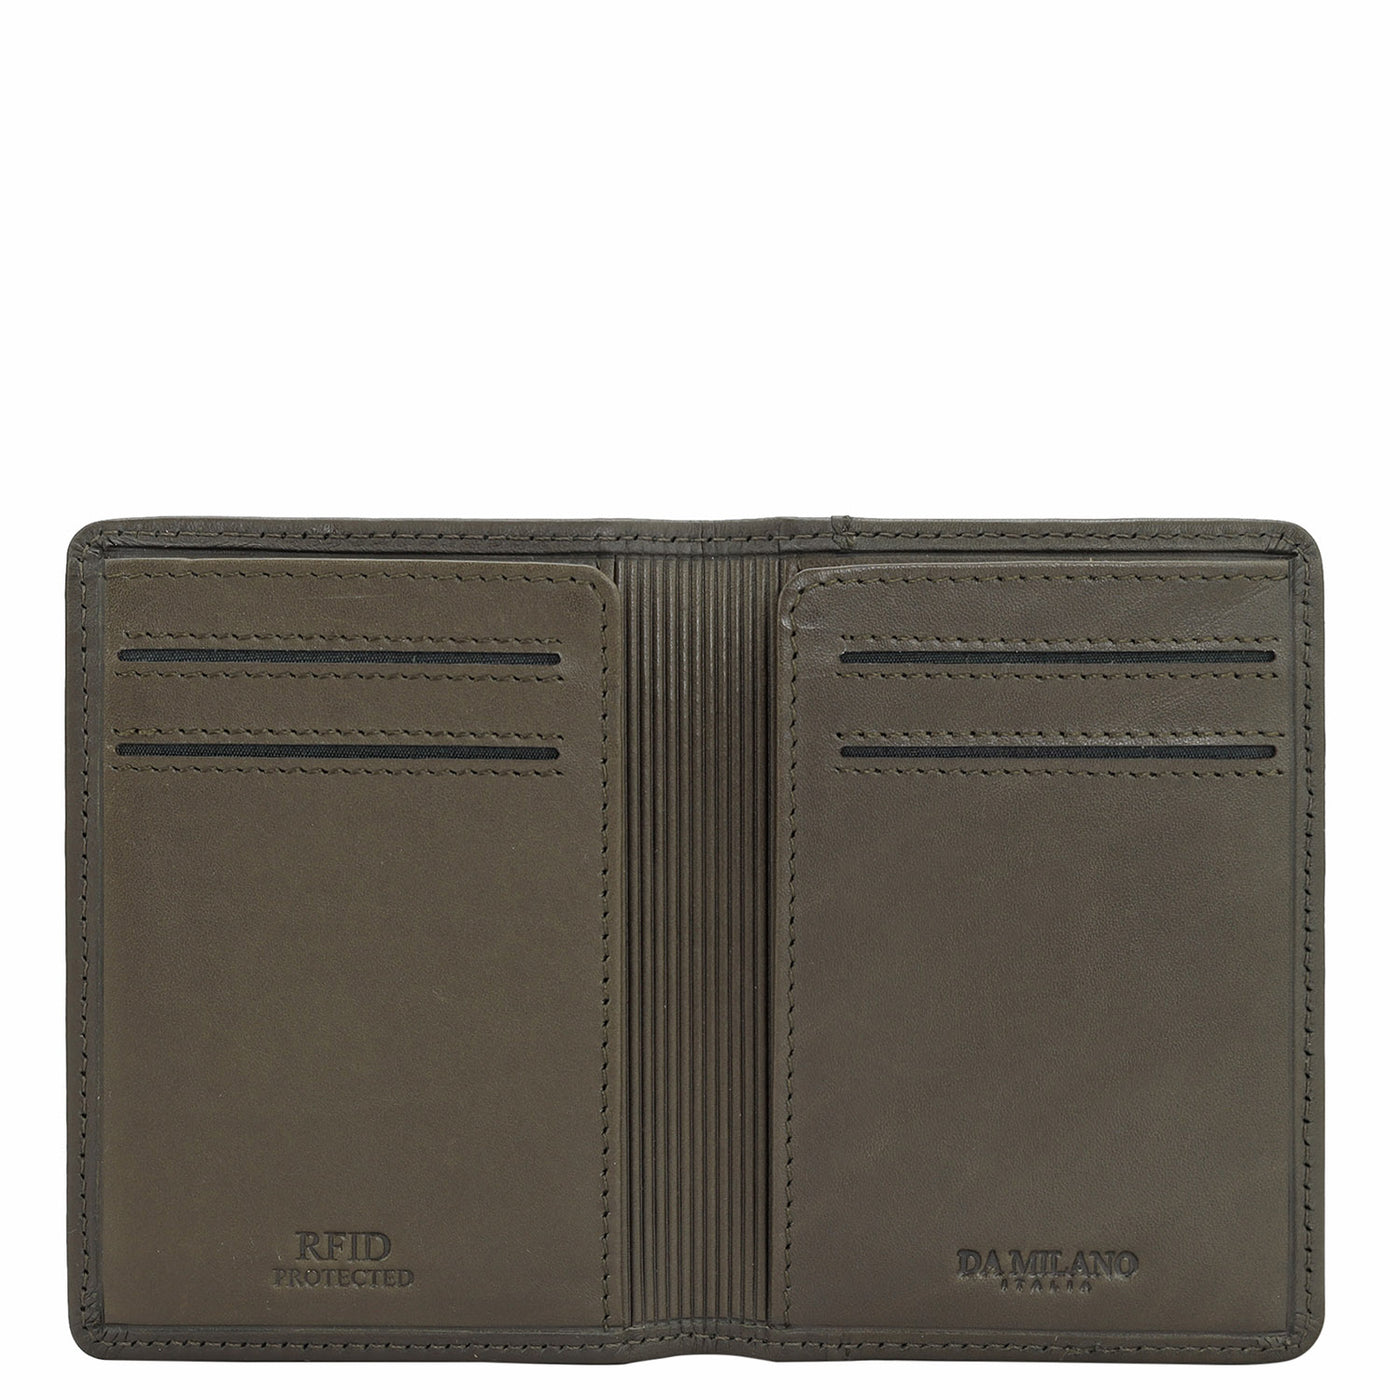 Calf Leather Card Case - Olive